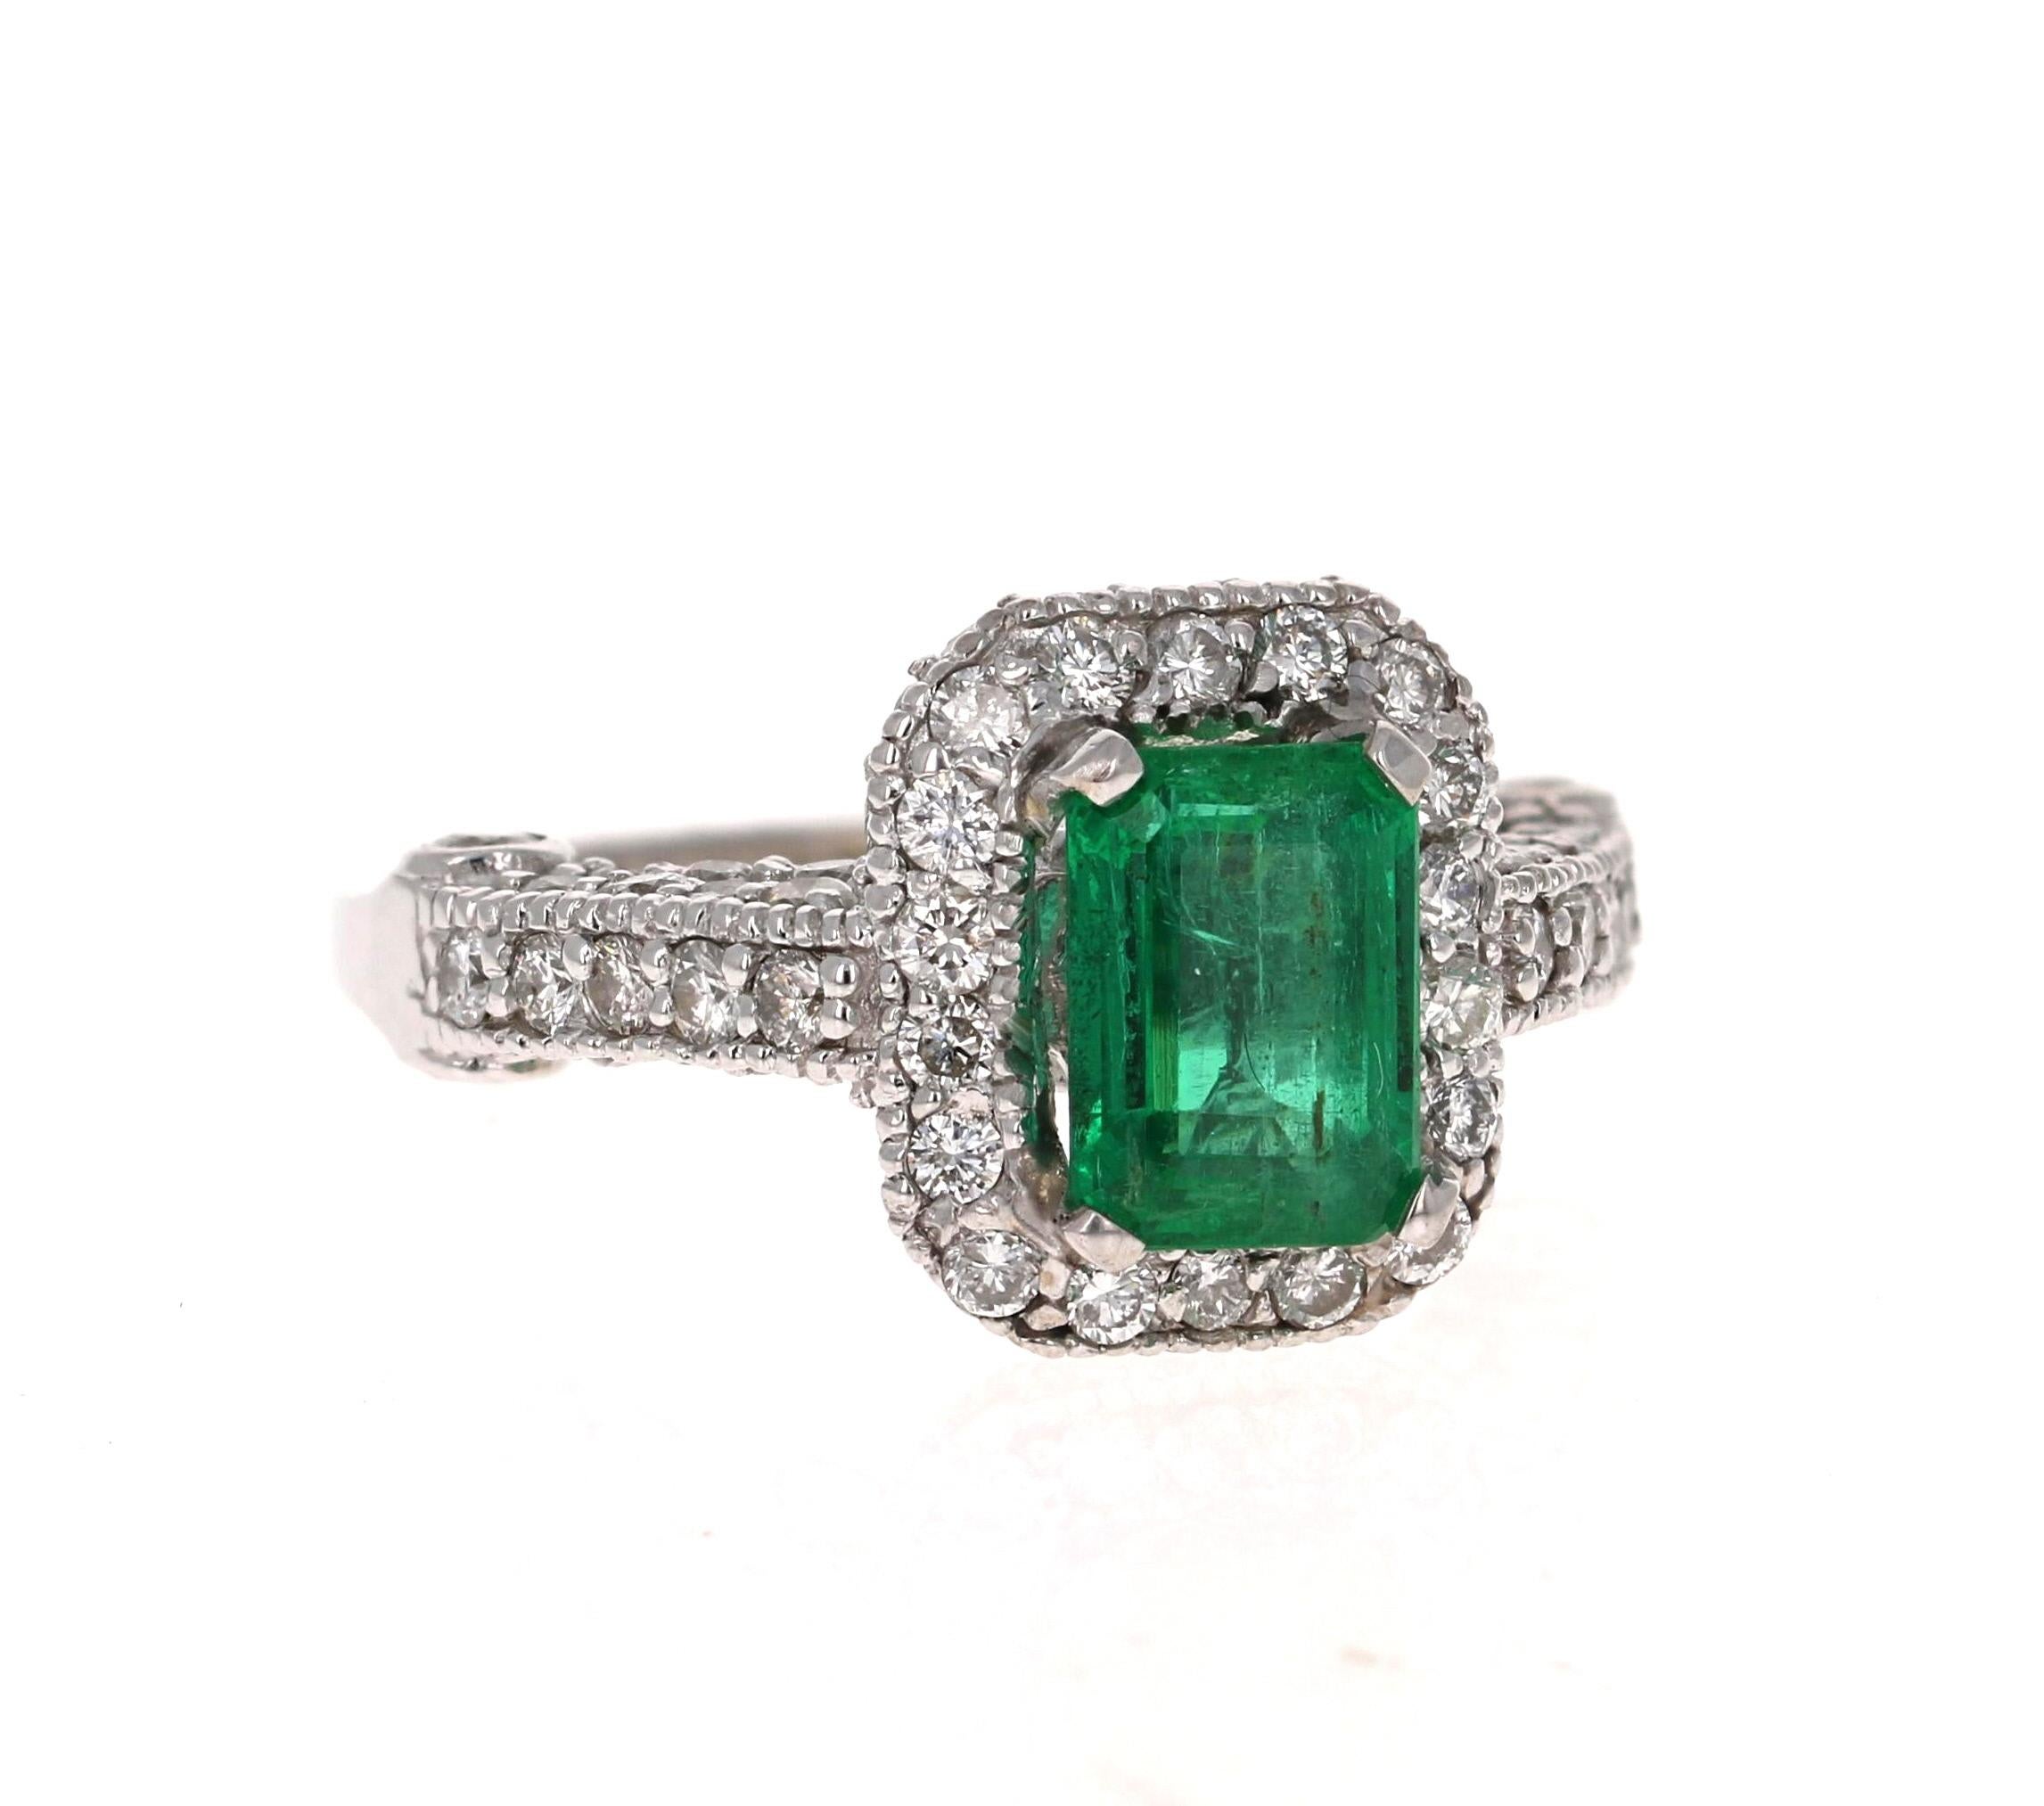 Stunning Vintage Inspired Emerald Cut Emerald Diamond Ring! 

This Emerald ring is absolutely gorgeous. The center is an Emerald cut Emerald which weighs 1.47 carats and measures in at approximately 6 mm x 8 mm.  The Emerald is surrounded by 84